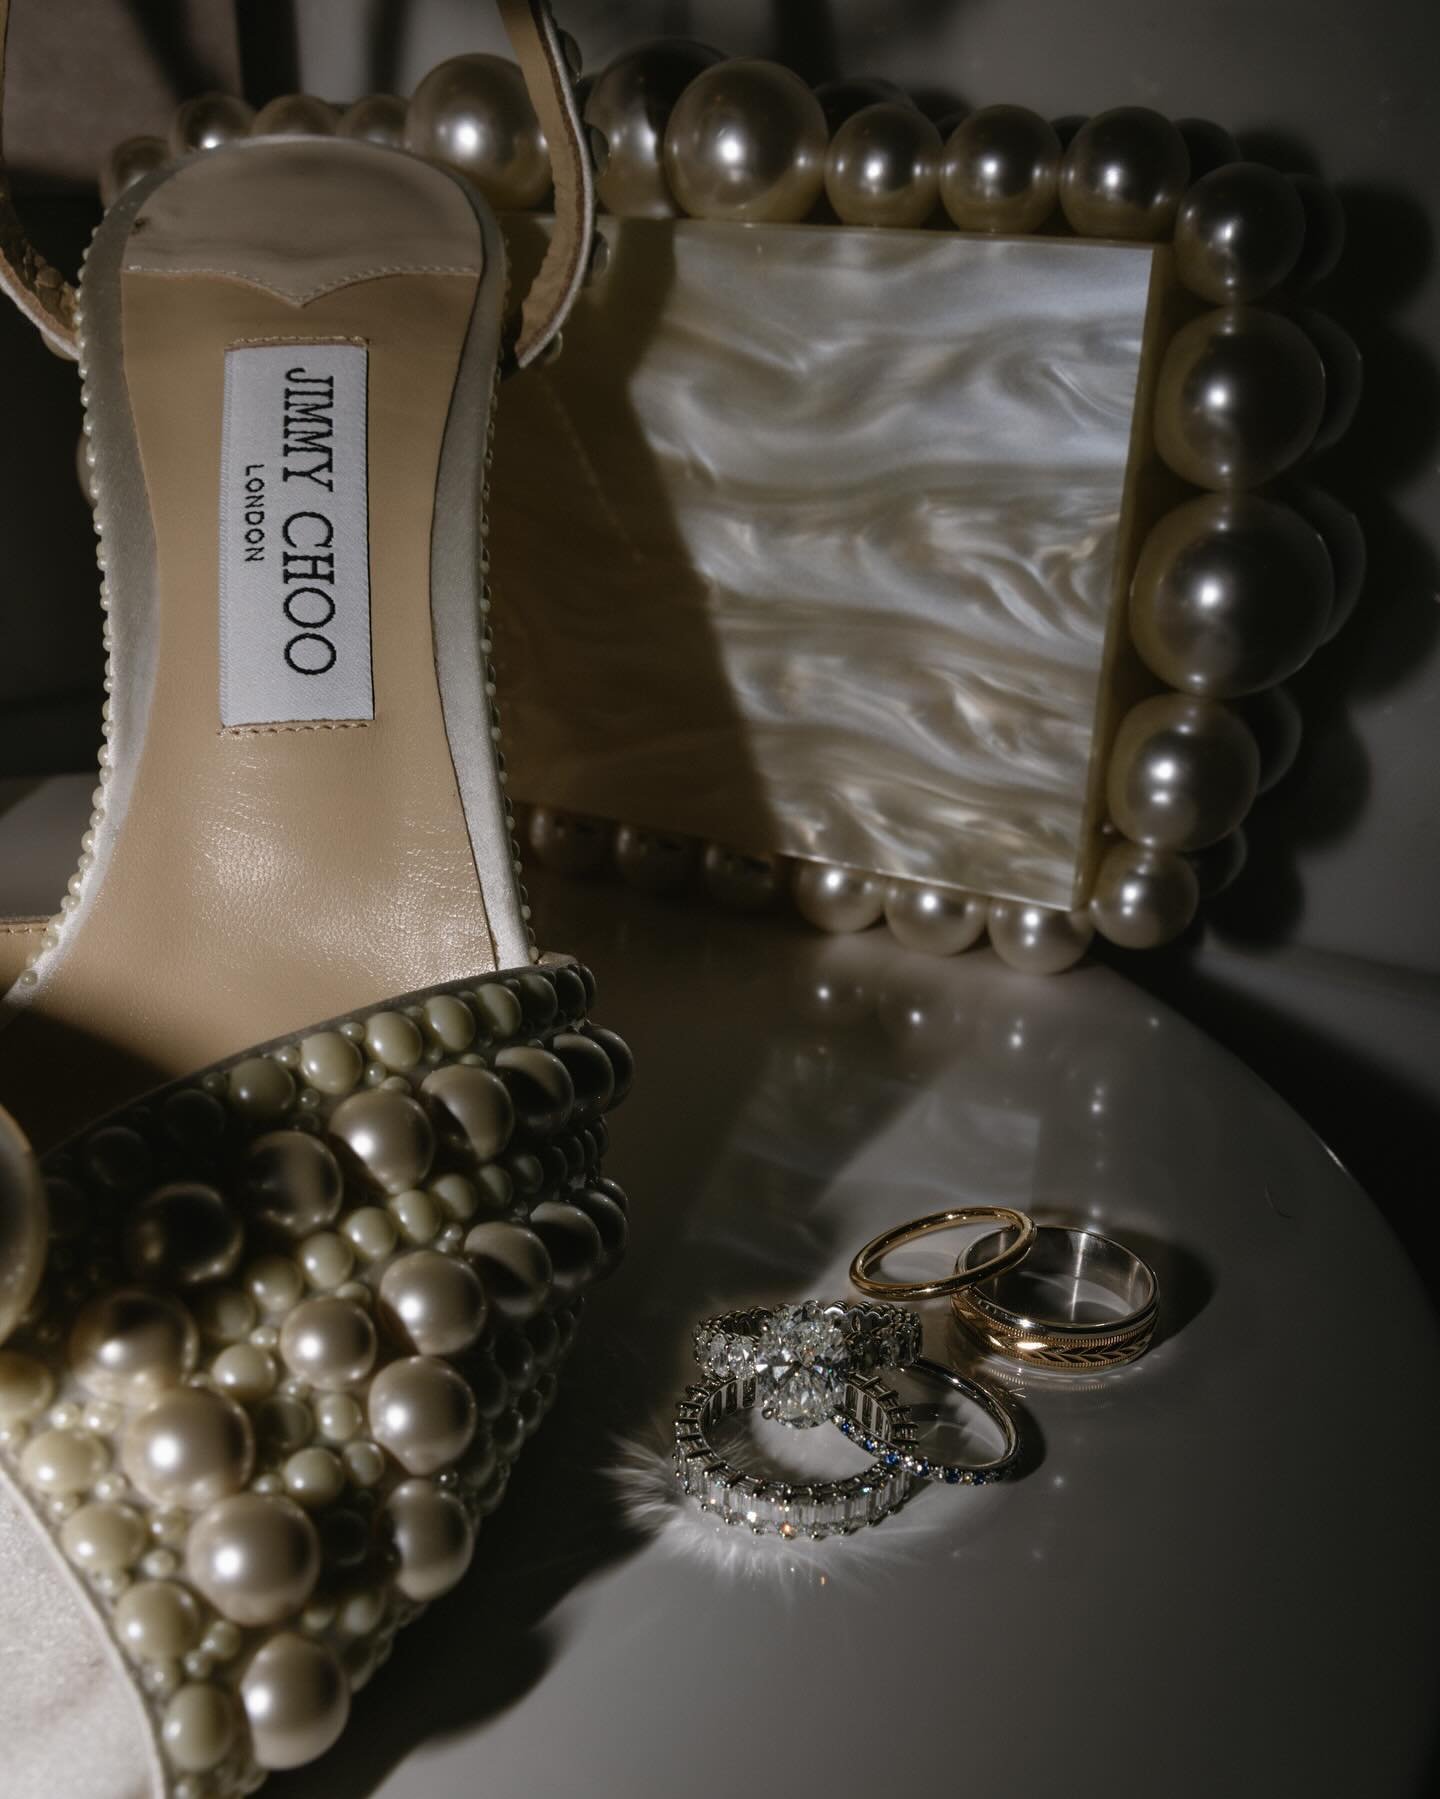 Details from Lauren + Bobby&rsquo;s day at the @thewestinsarasota and @sarasotayachtclub 💎 💎 💎 @jimmychoo come sponsor us 
.
.
.
#sarasotaweddingphotographer #sarasotaphotographer #floridaweddingphotographer #tampaweddingphotographer #orlandoweddi